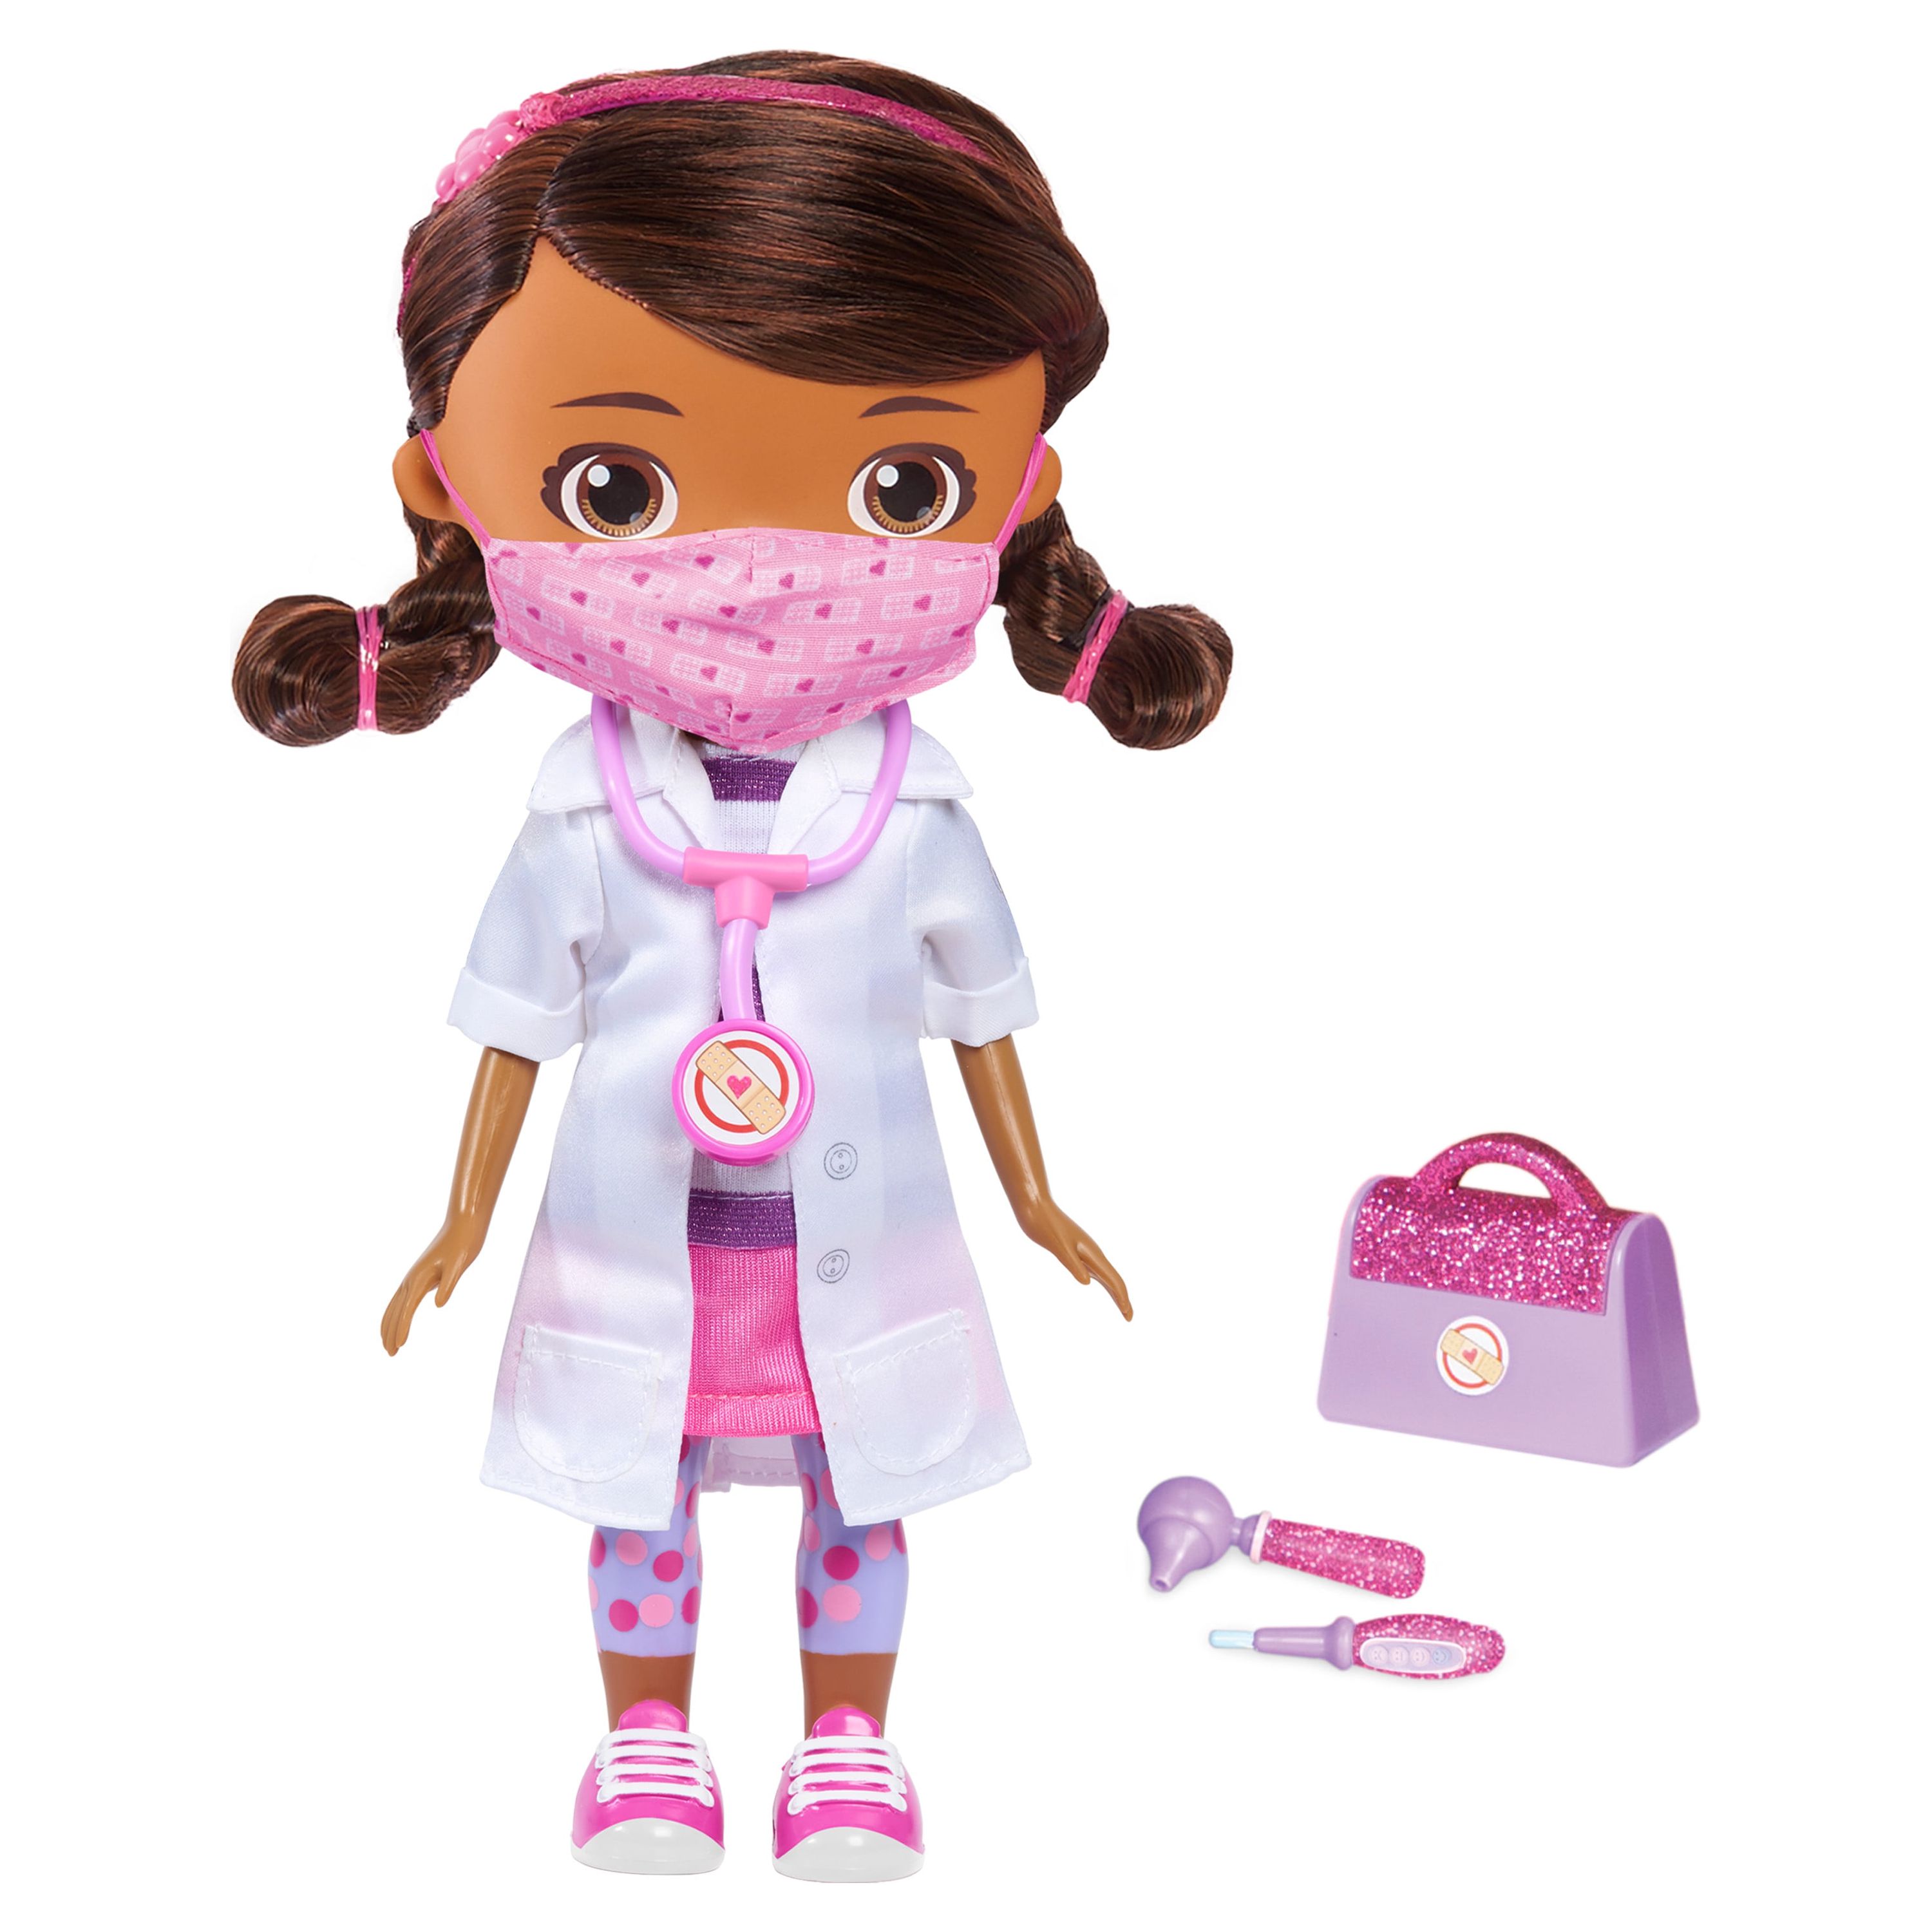 Disney Junior Doc McStuffins Wash Your Hands Singing Doll, With Mask & Accessories, Officially Licensed Kids Toys for Ages 3 Up, Gifts and Presents - image 1 of 5